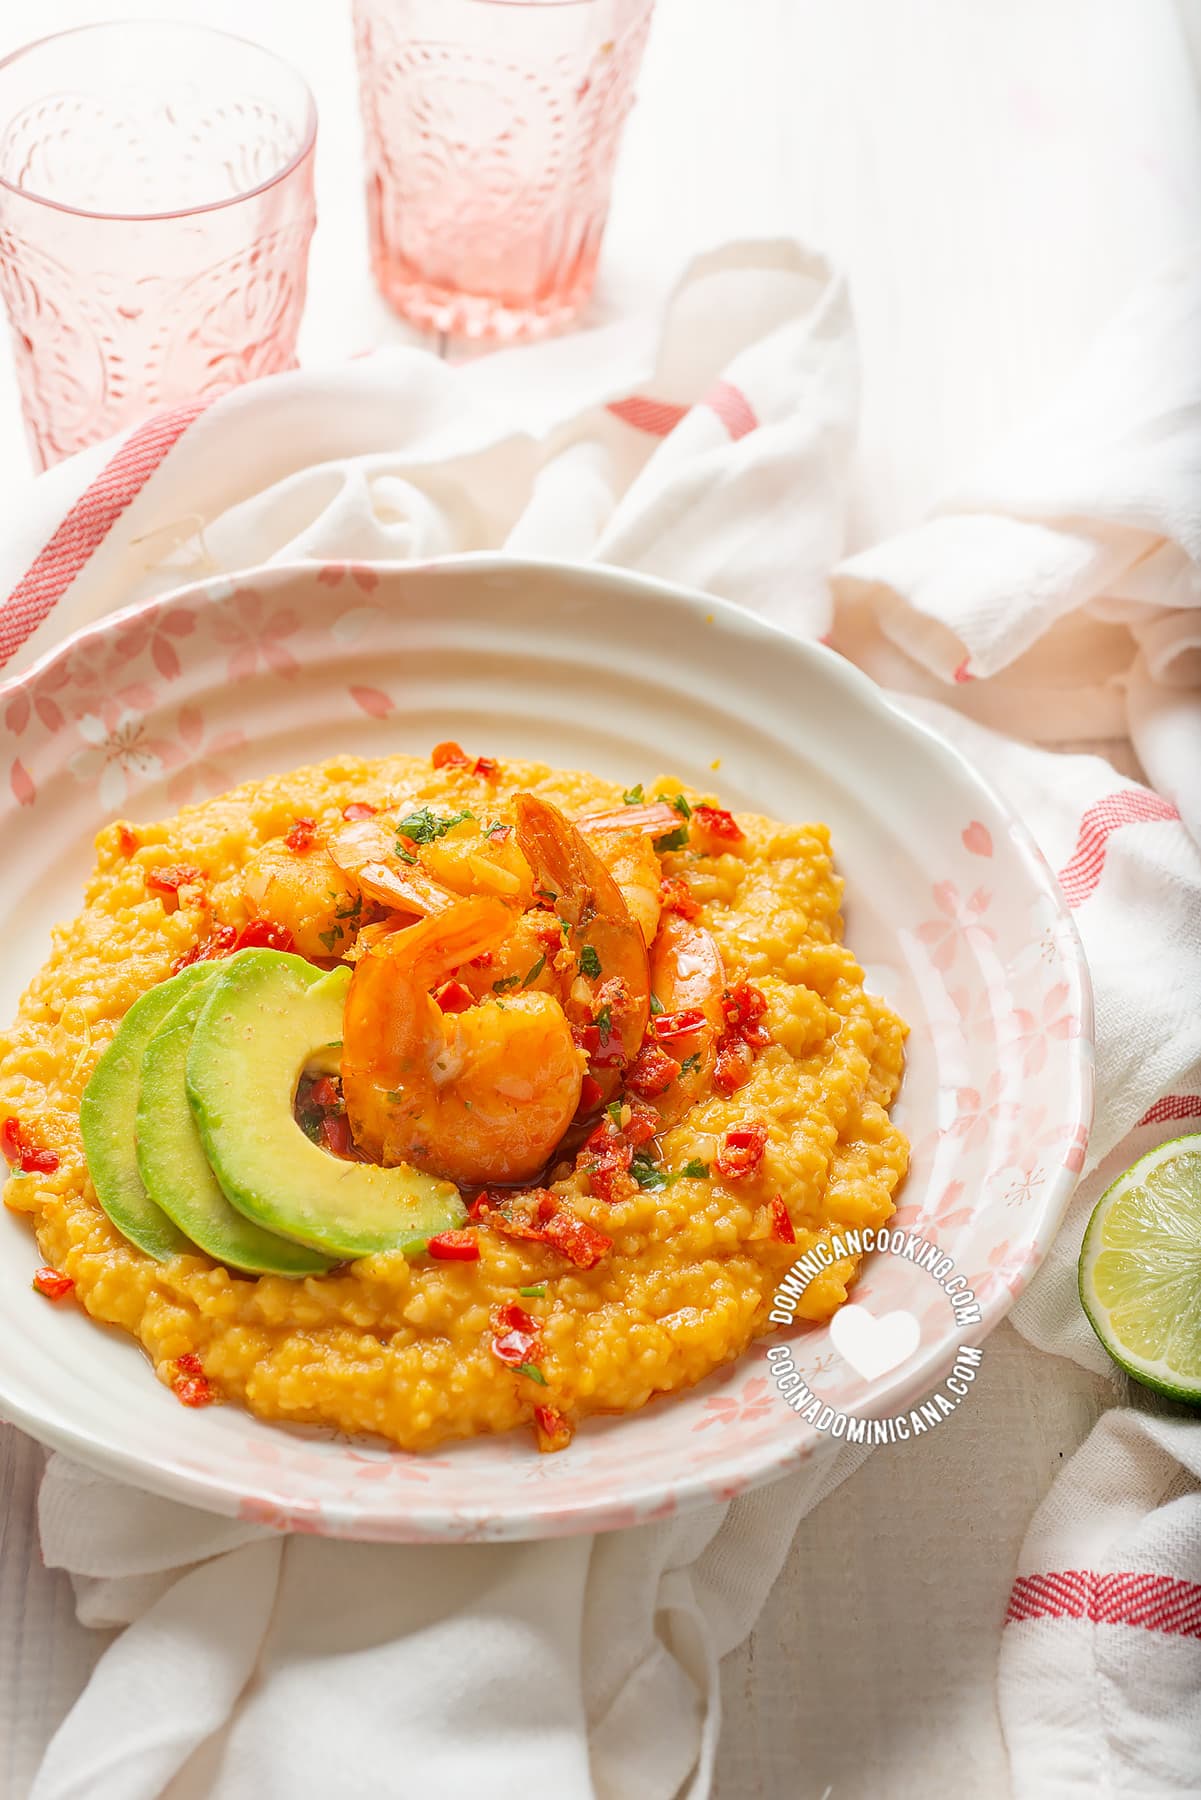 Chenchén (cracked corn pilaf with spicy shrimp and avocado).